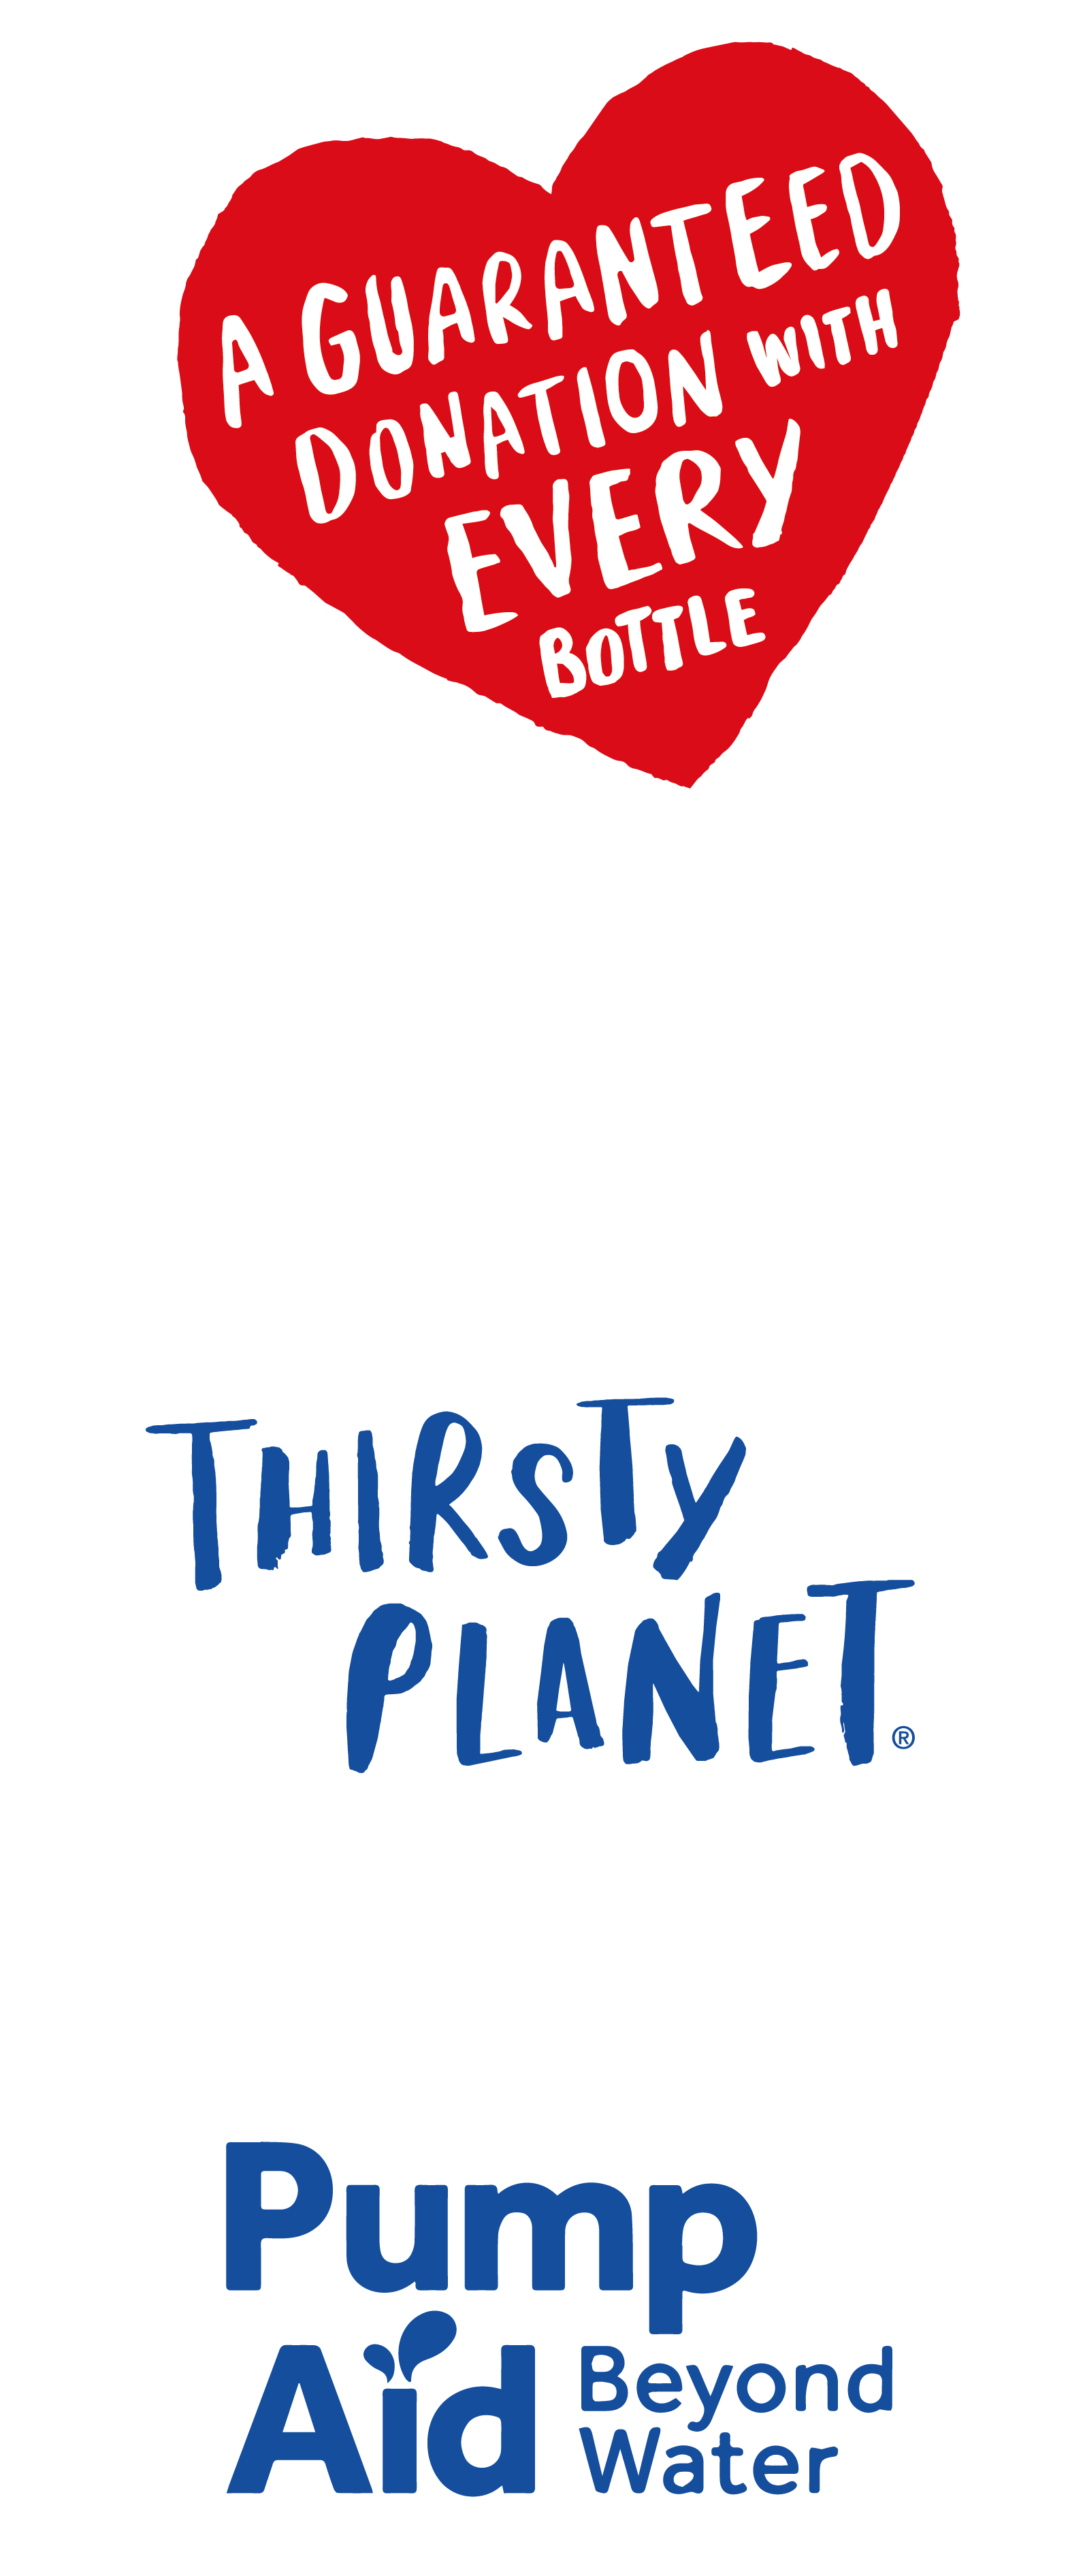 A guaranteed donation with every bottle. 100% of Thirsty Planet donations are paid directly to Pump Aid